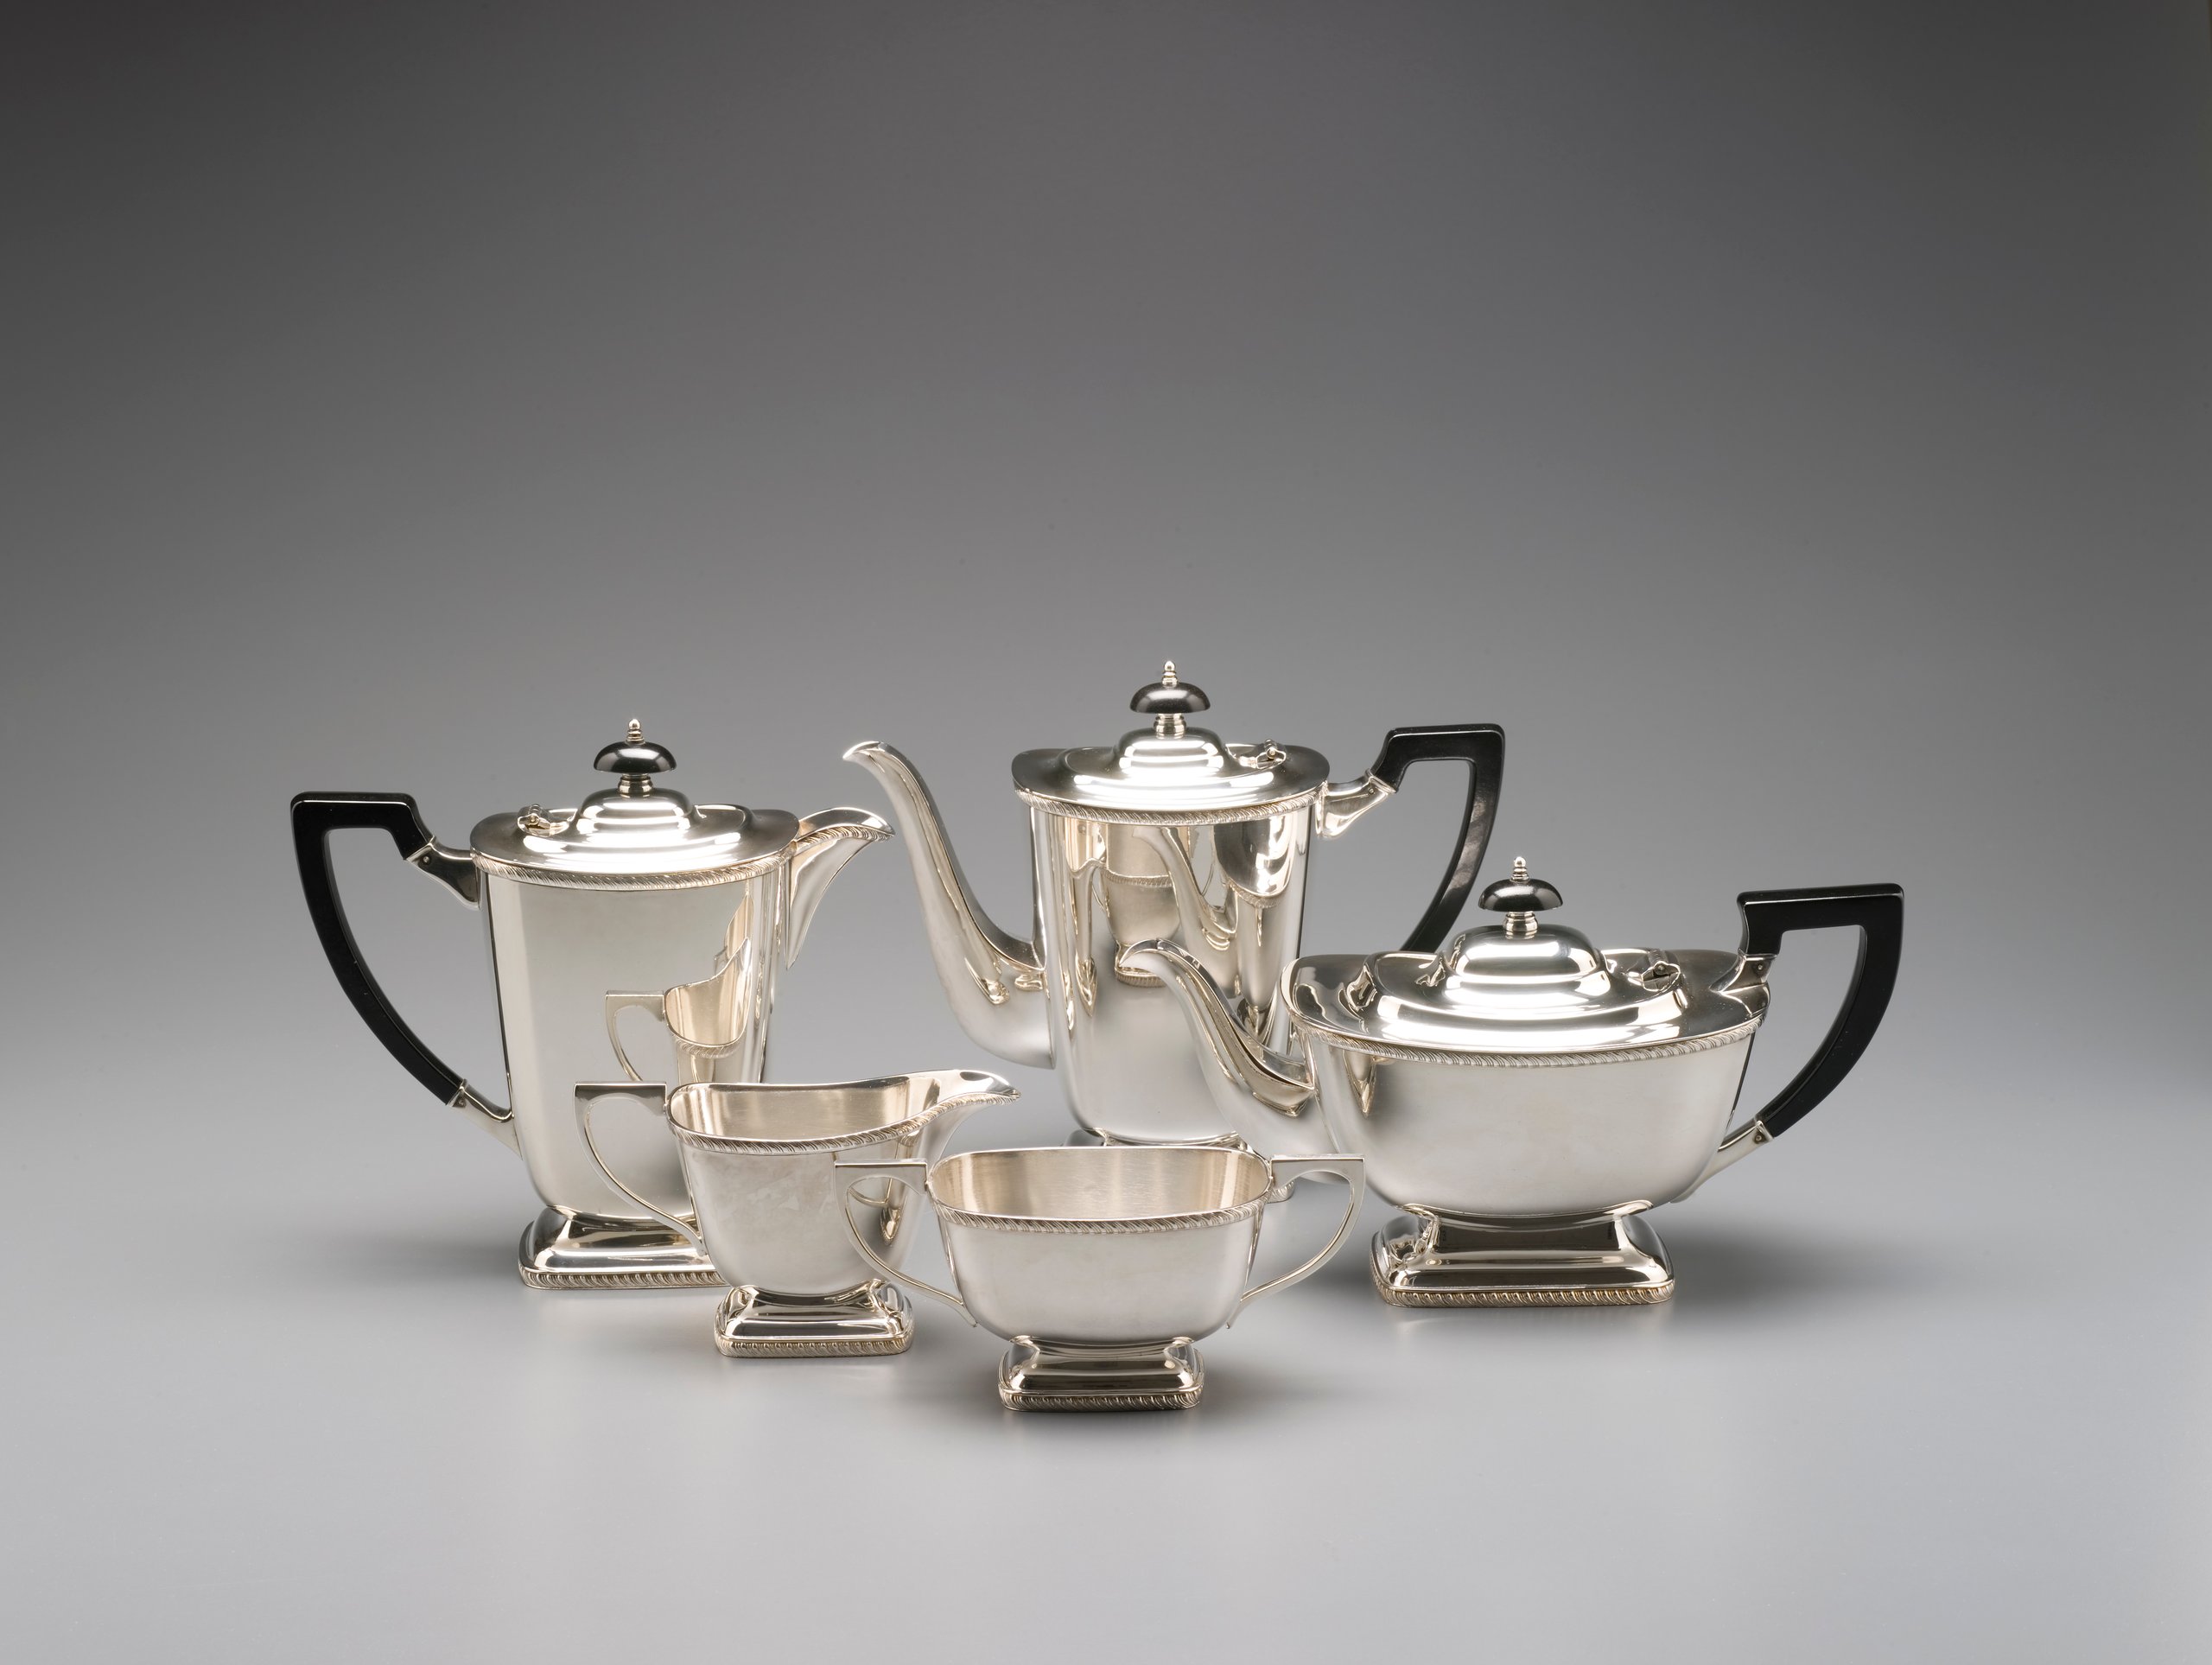 'Hecworth' tea and coffee service set by Platers Pty Ltd